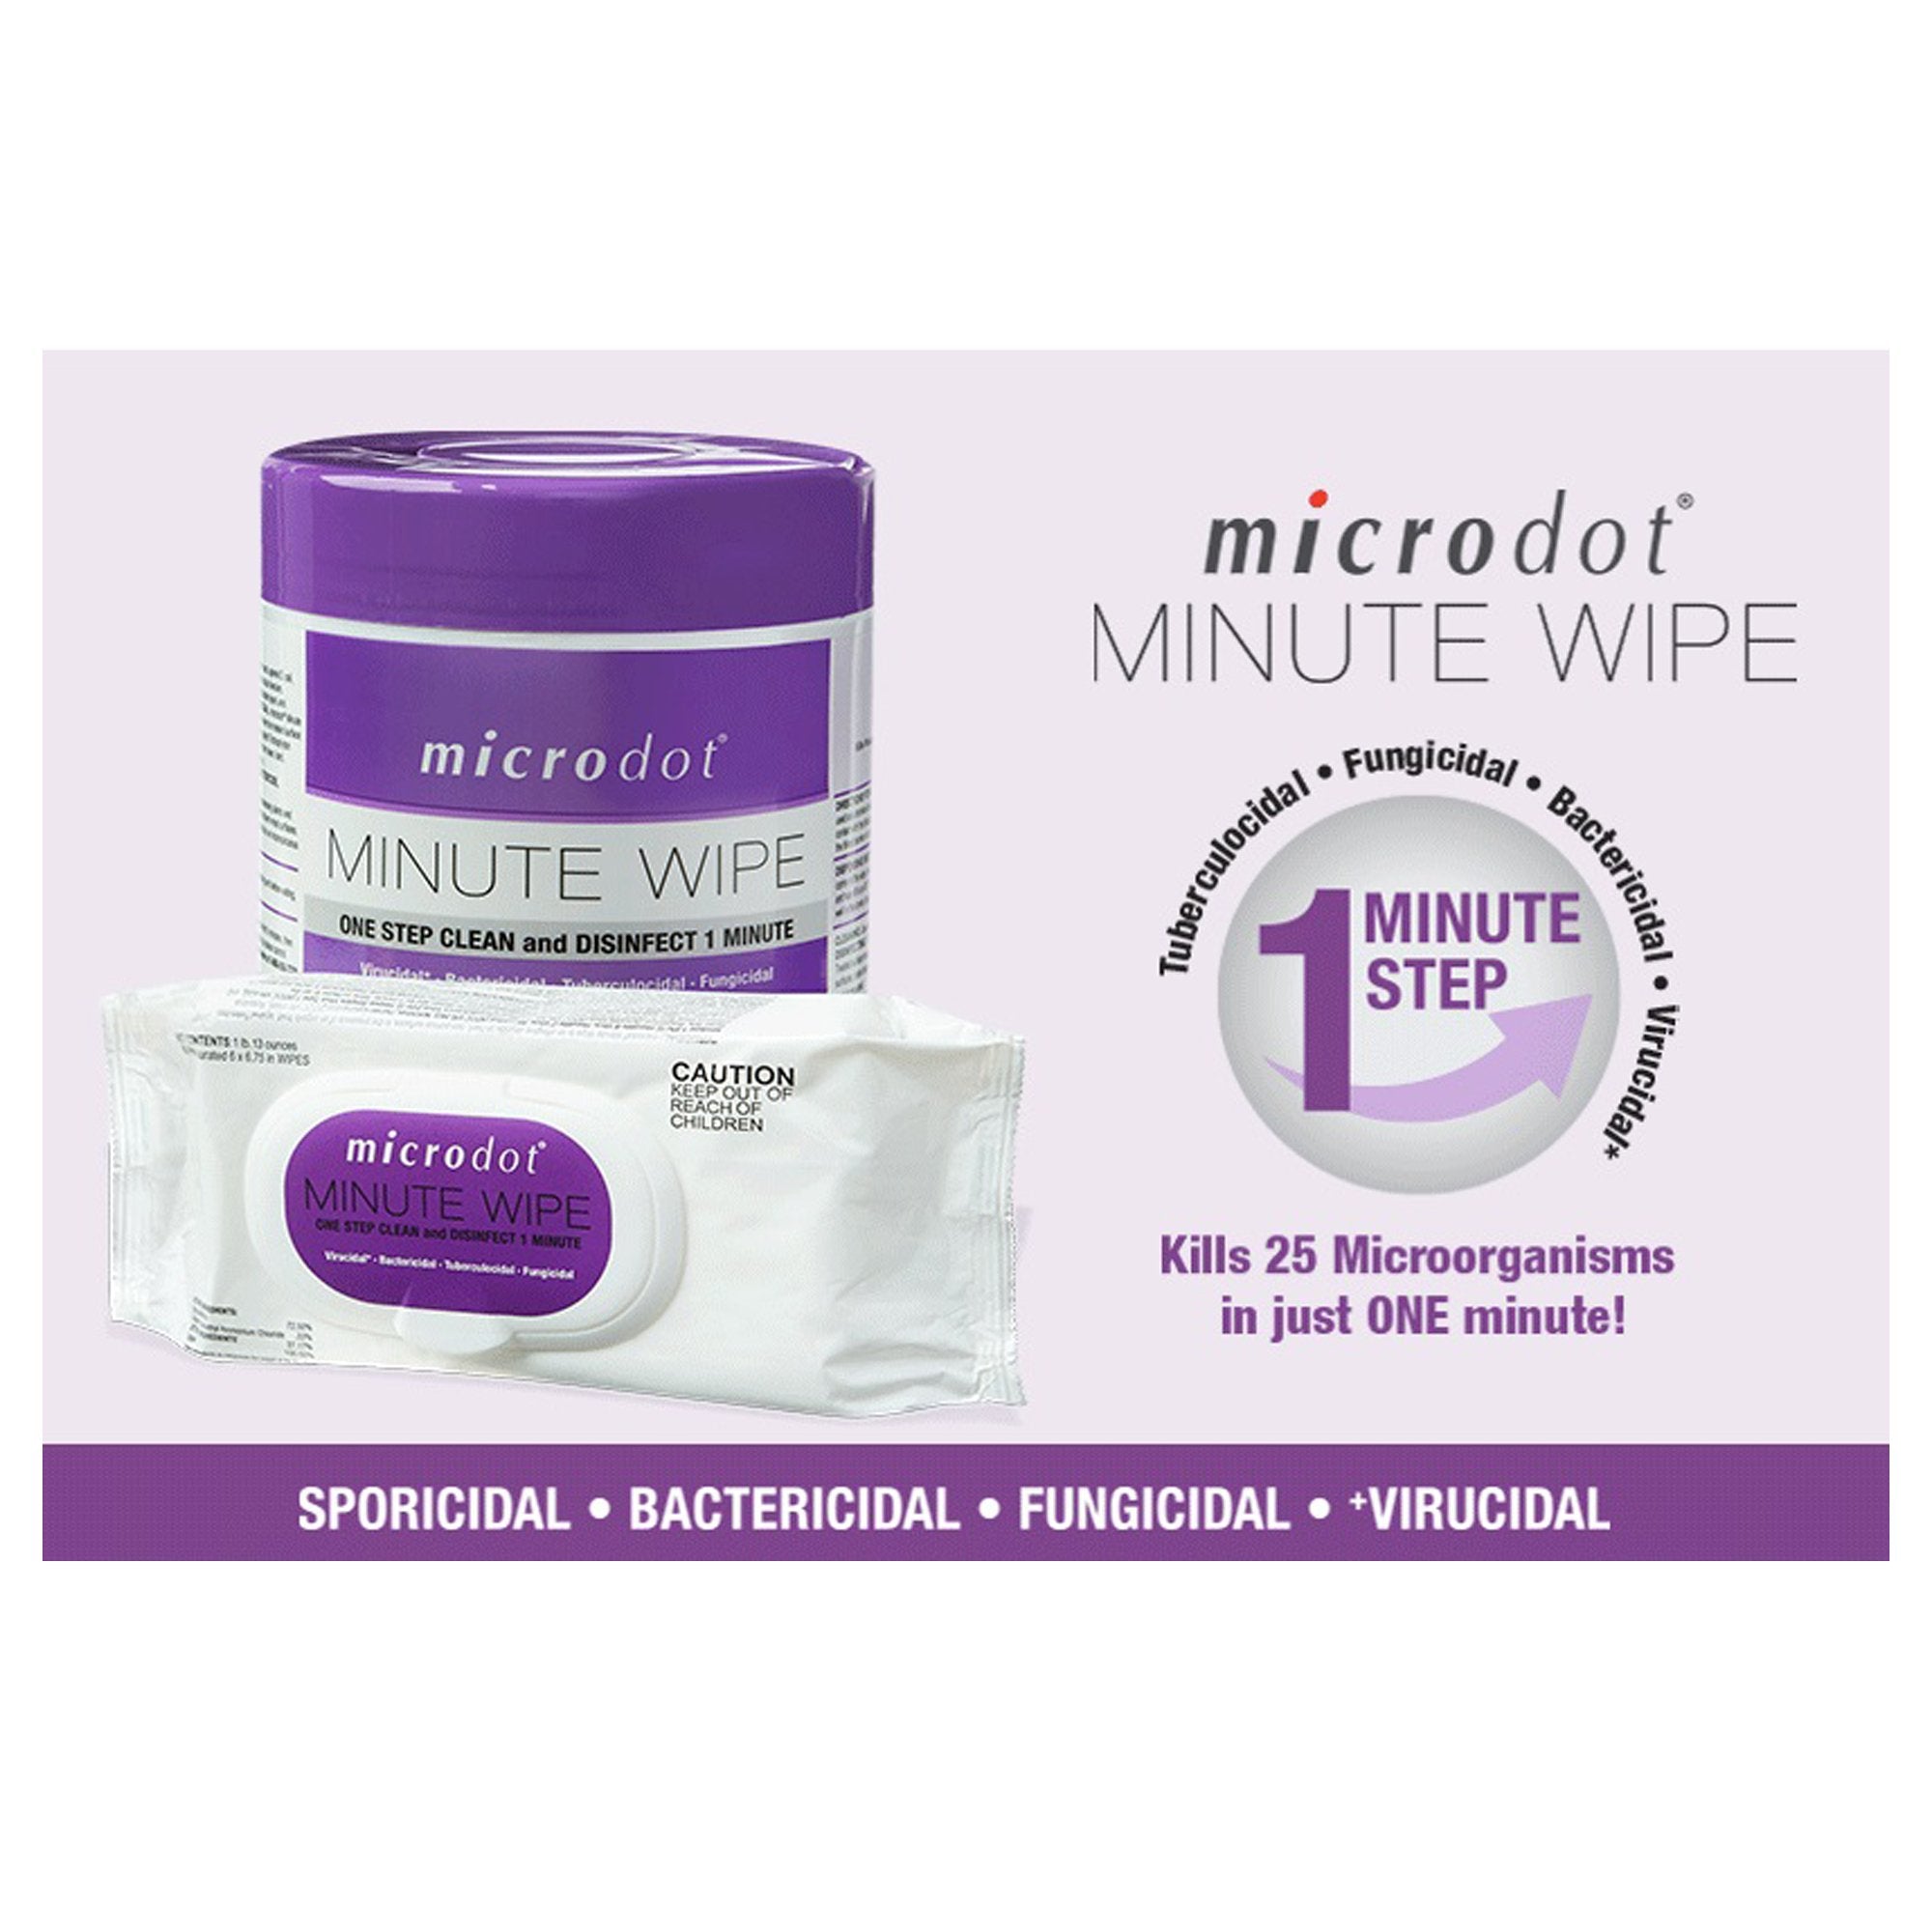 microdot Minute Wipe Surface Disinfectant Cleaner Premoistened Alcohol Based Manual Pull Wipe 60 Count Soft Pack Alcohol Scent NonSterile